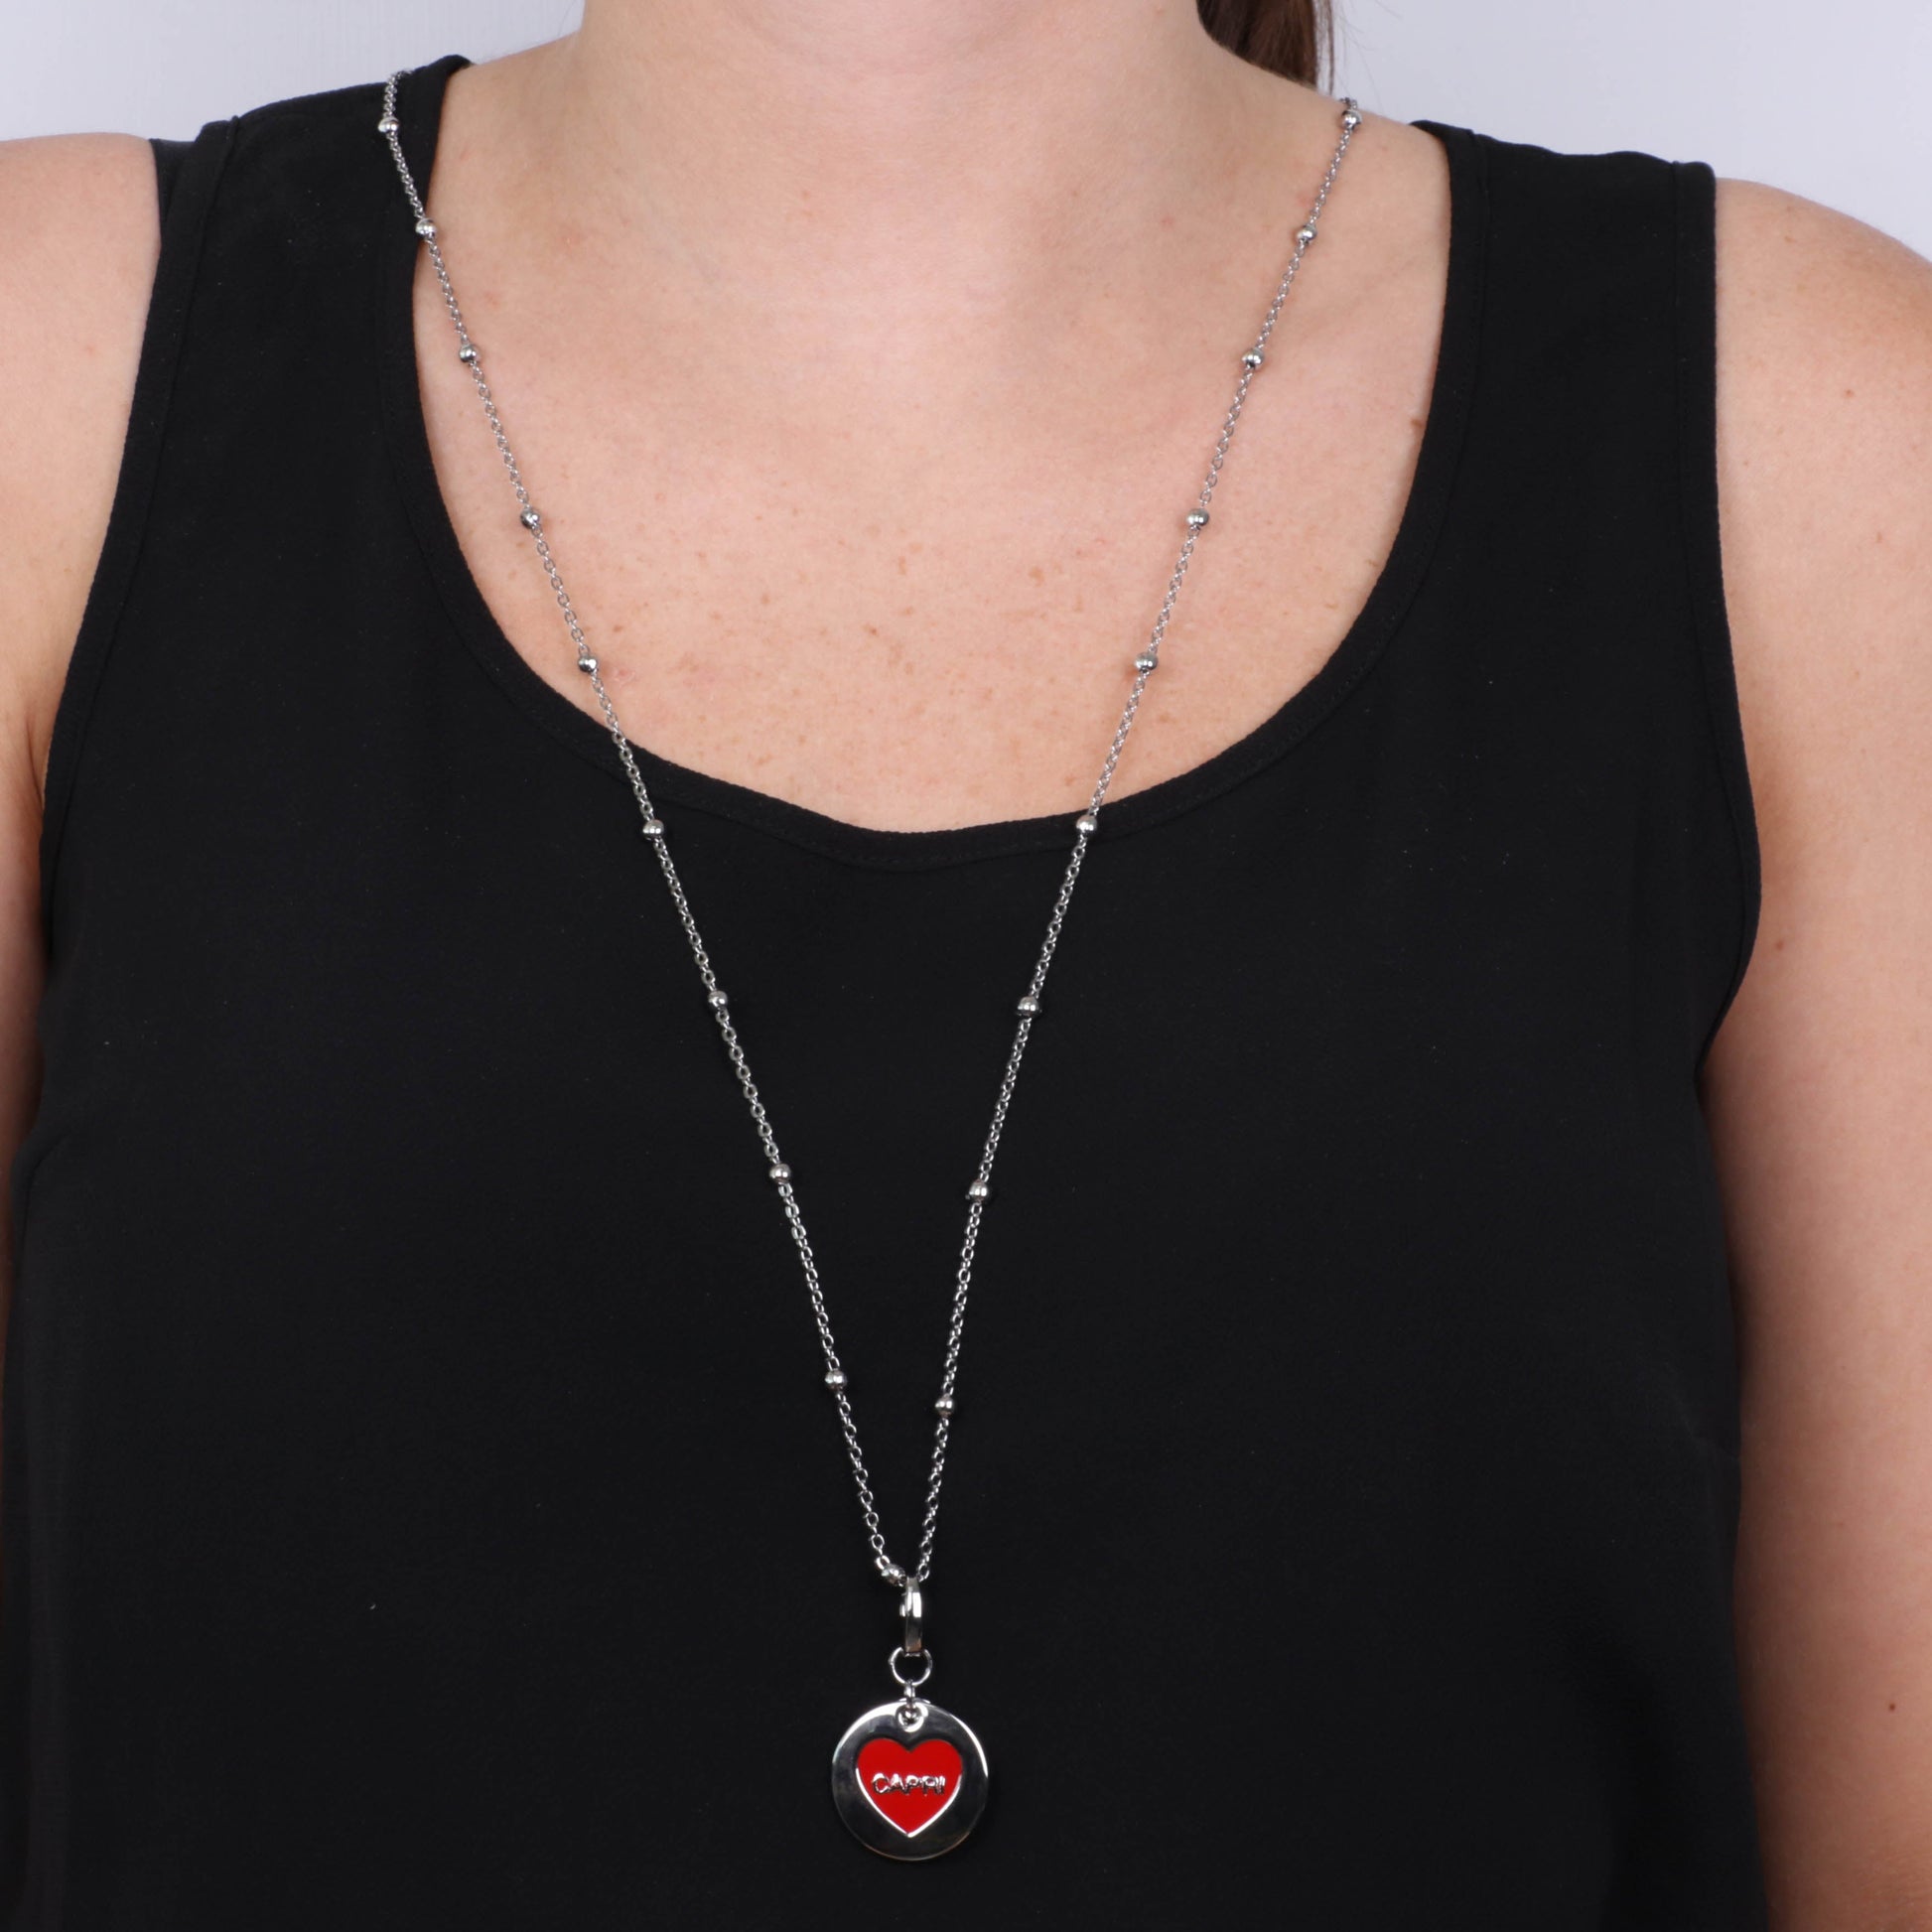 Metal pendant in medallion with Capri symbol in the heart, embellished with red enamel